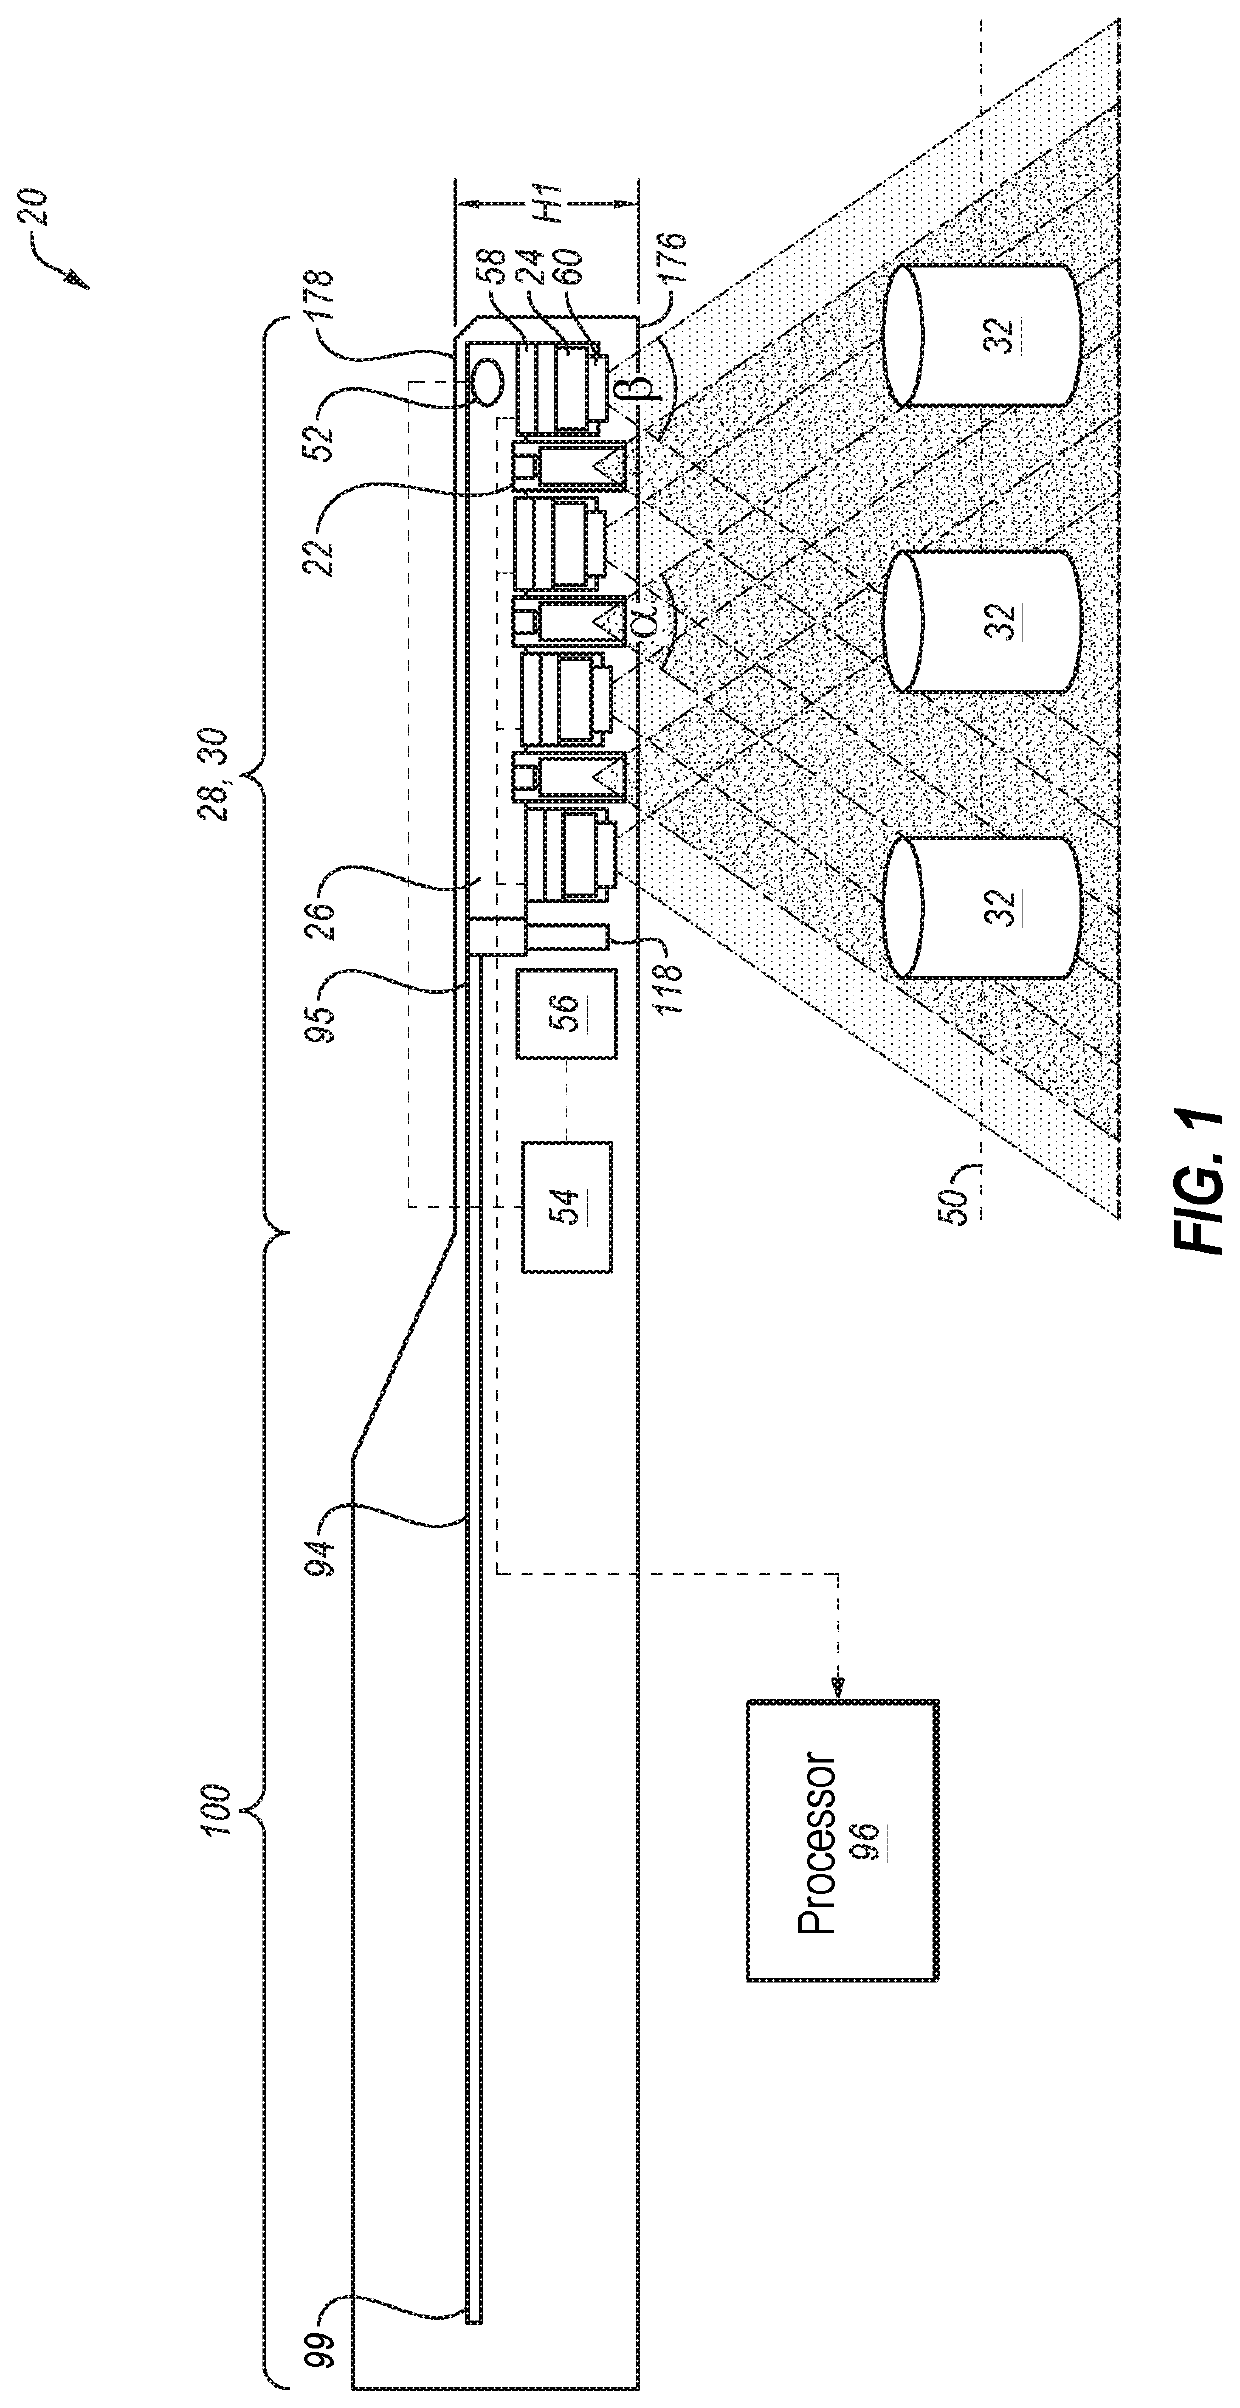 Intraoral 3D scanner employing multiple miniature cameras and multiple miniature pattern projectors